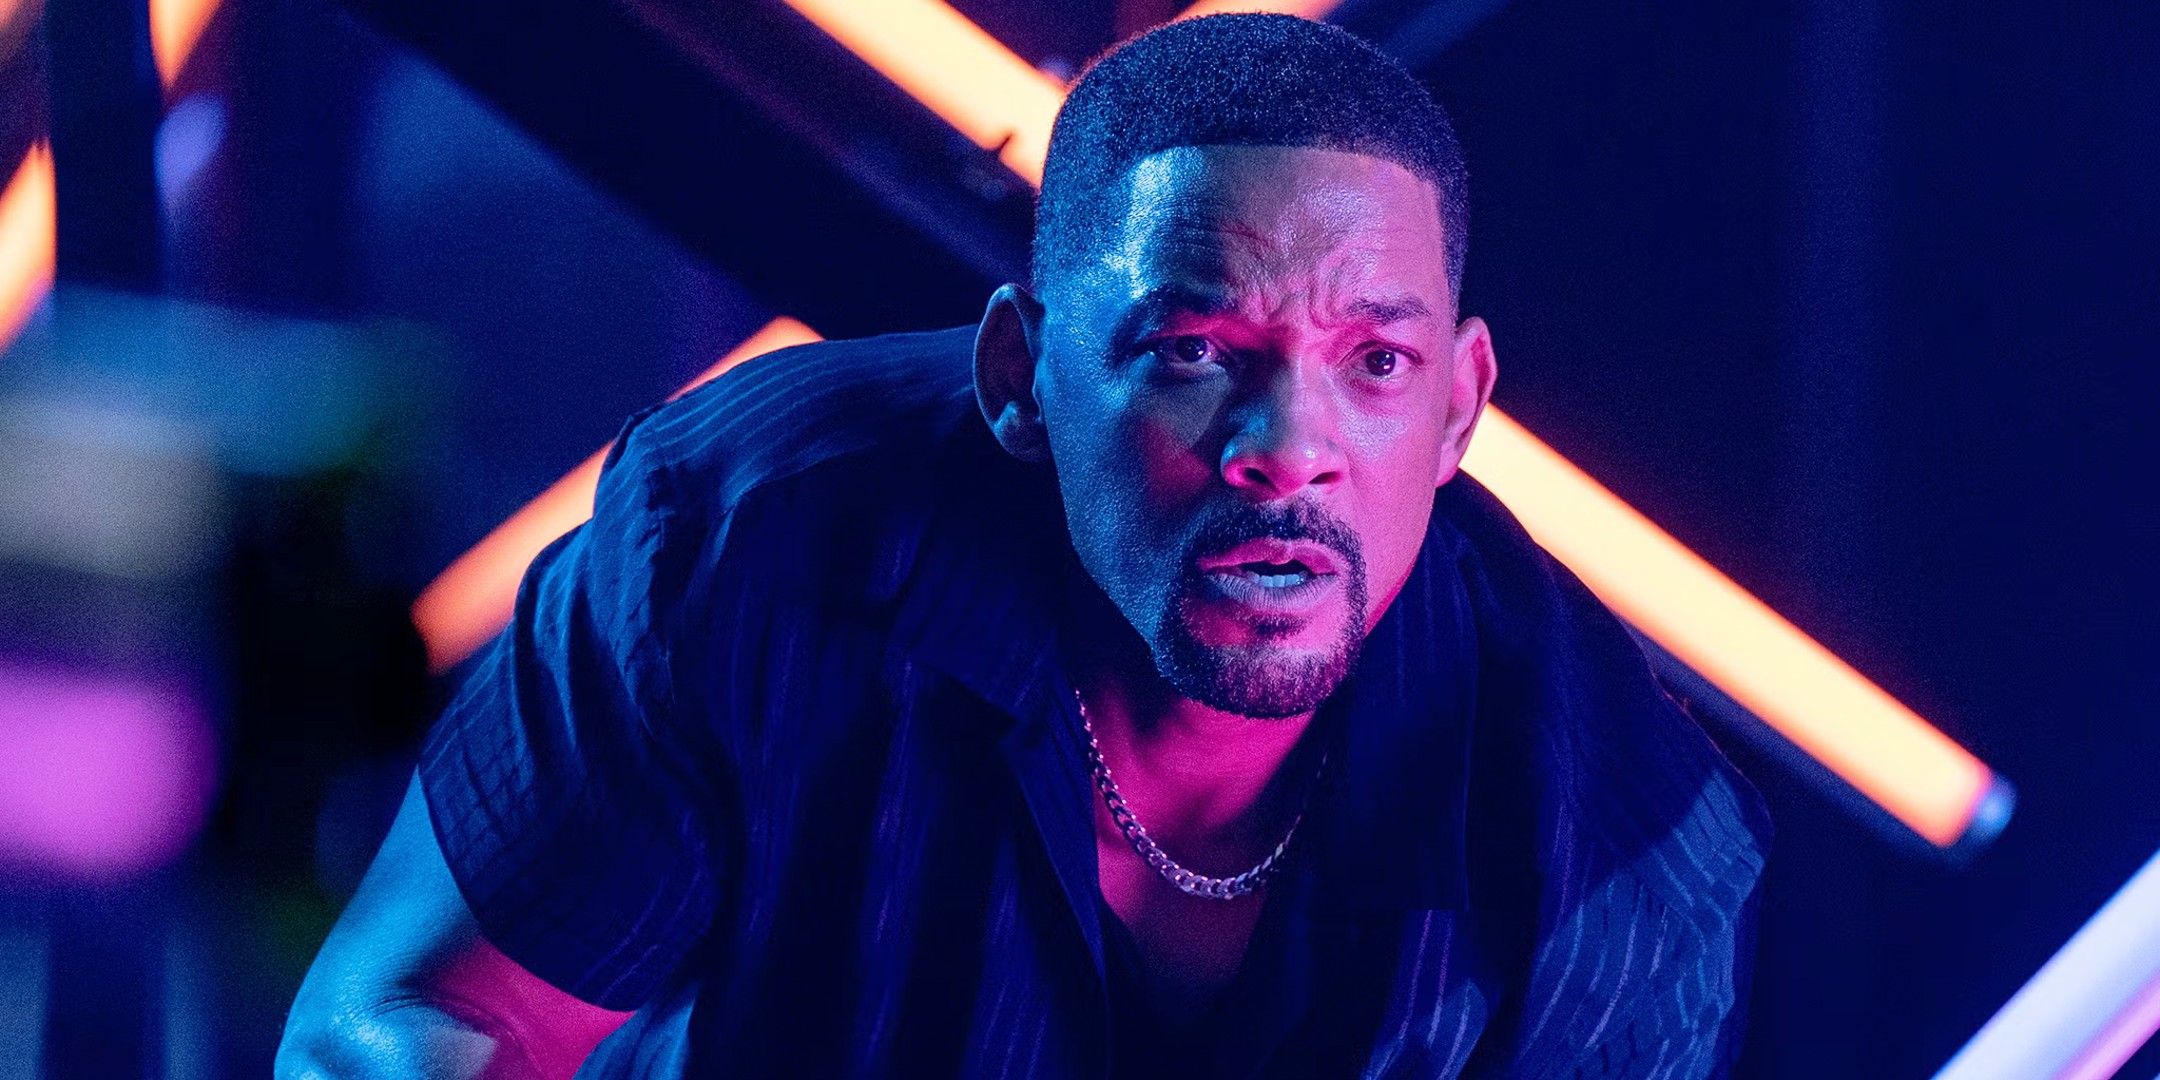 Will Smith in Bad Boys: Ride or Die